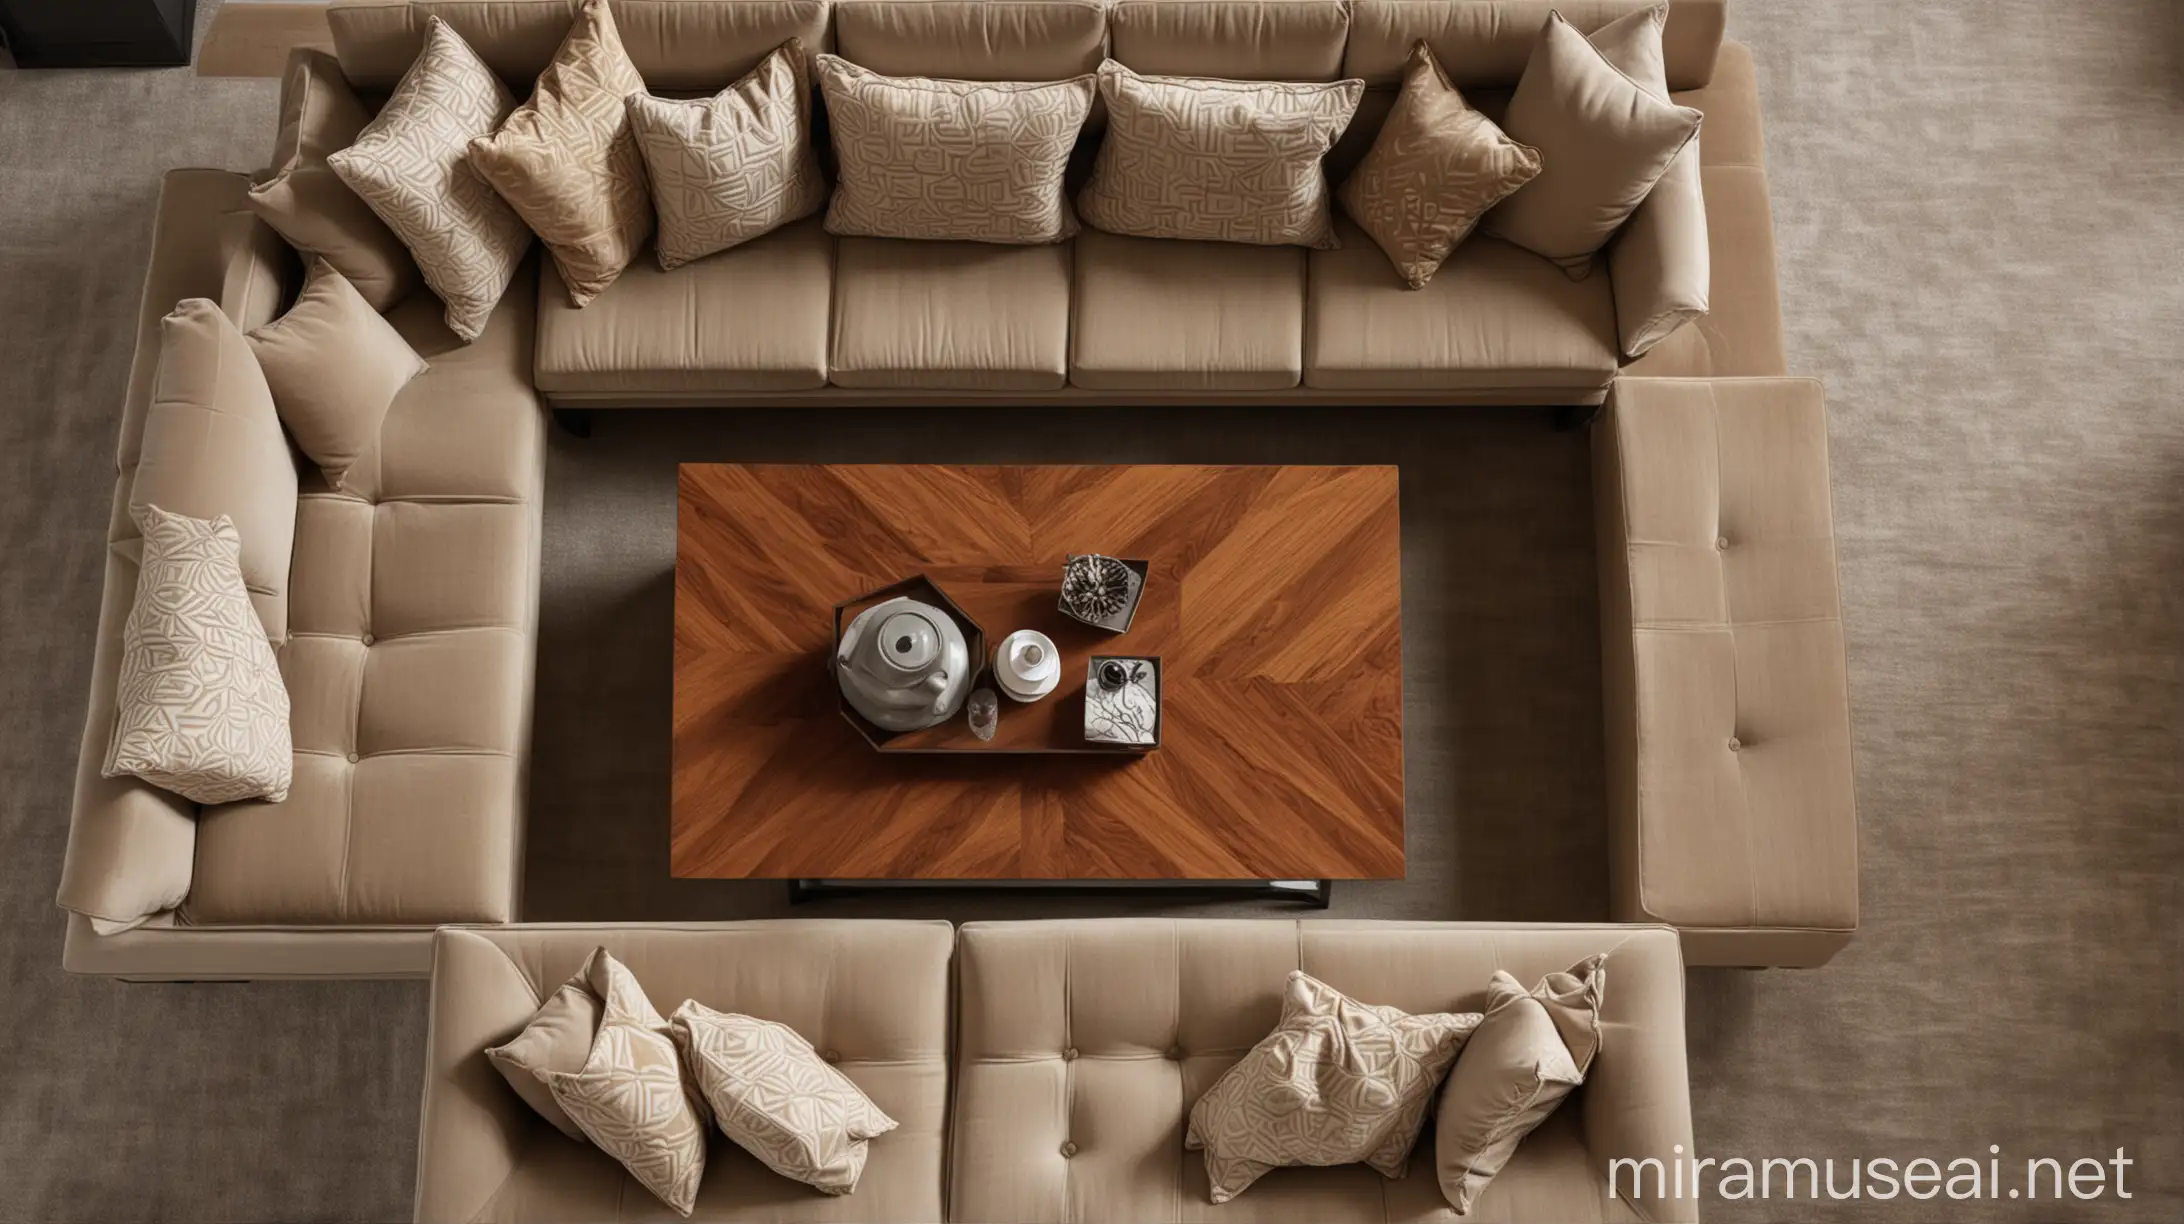 A high-angle shot looking down on the coffee table and sofa, creating a sense of spaciousness and emphasizing the geometric shapes of the furniture.